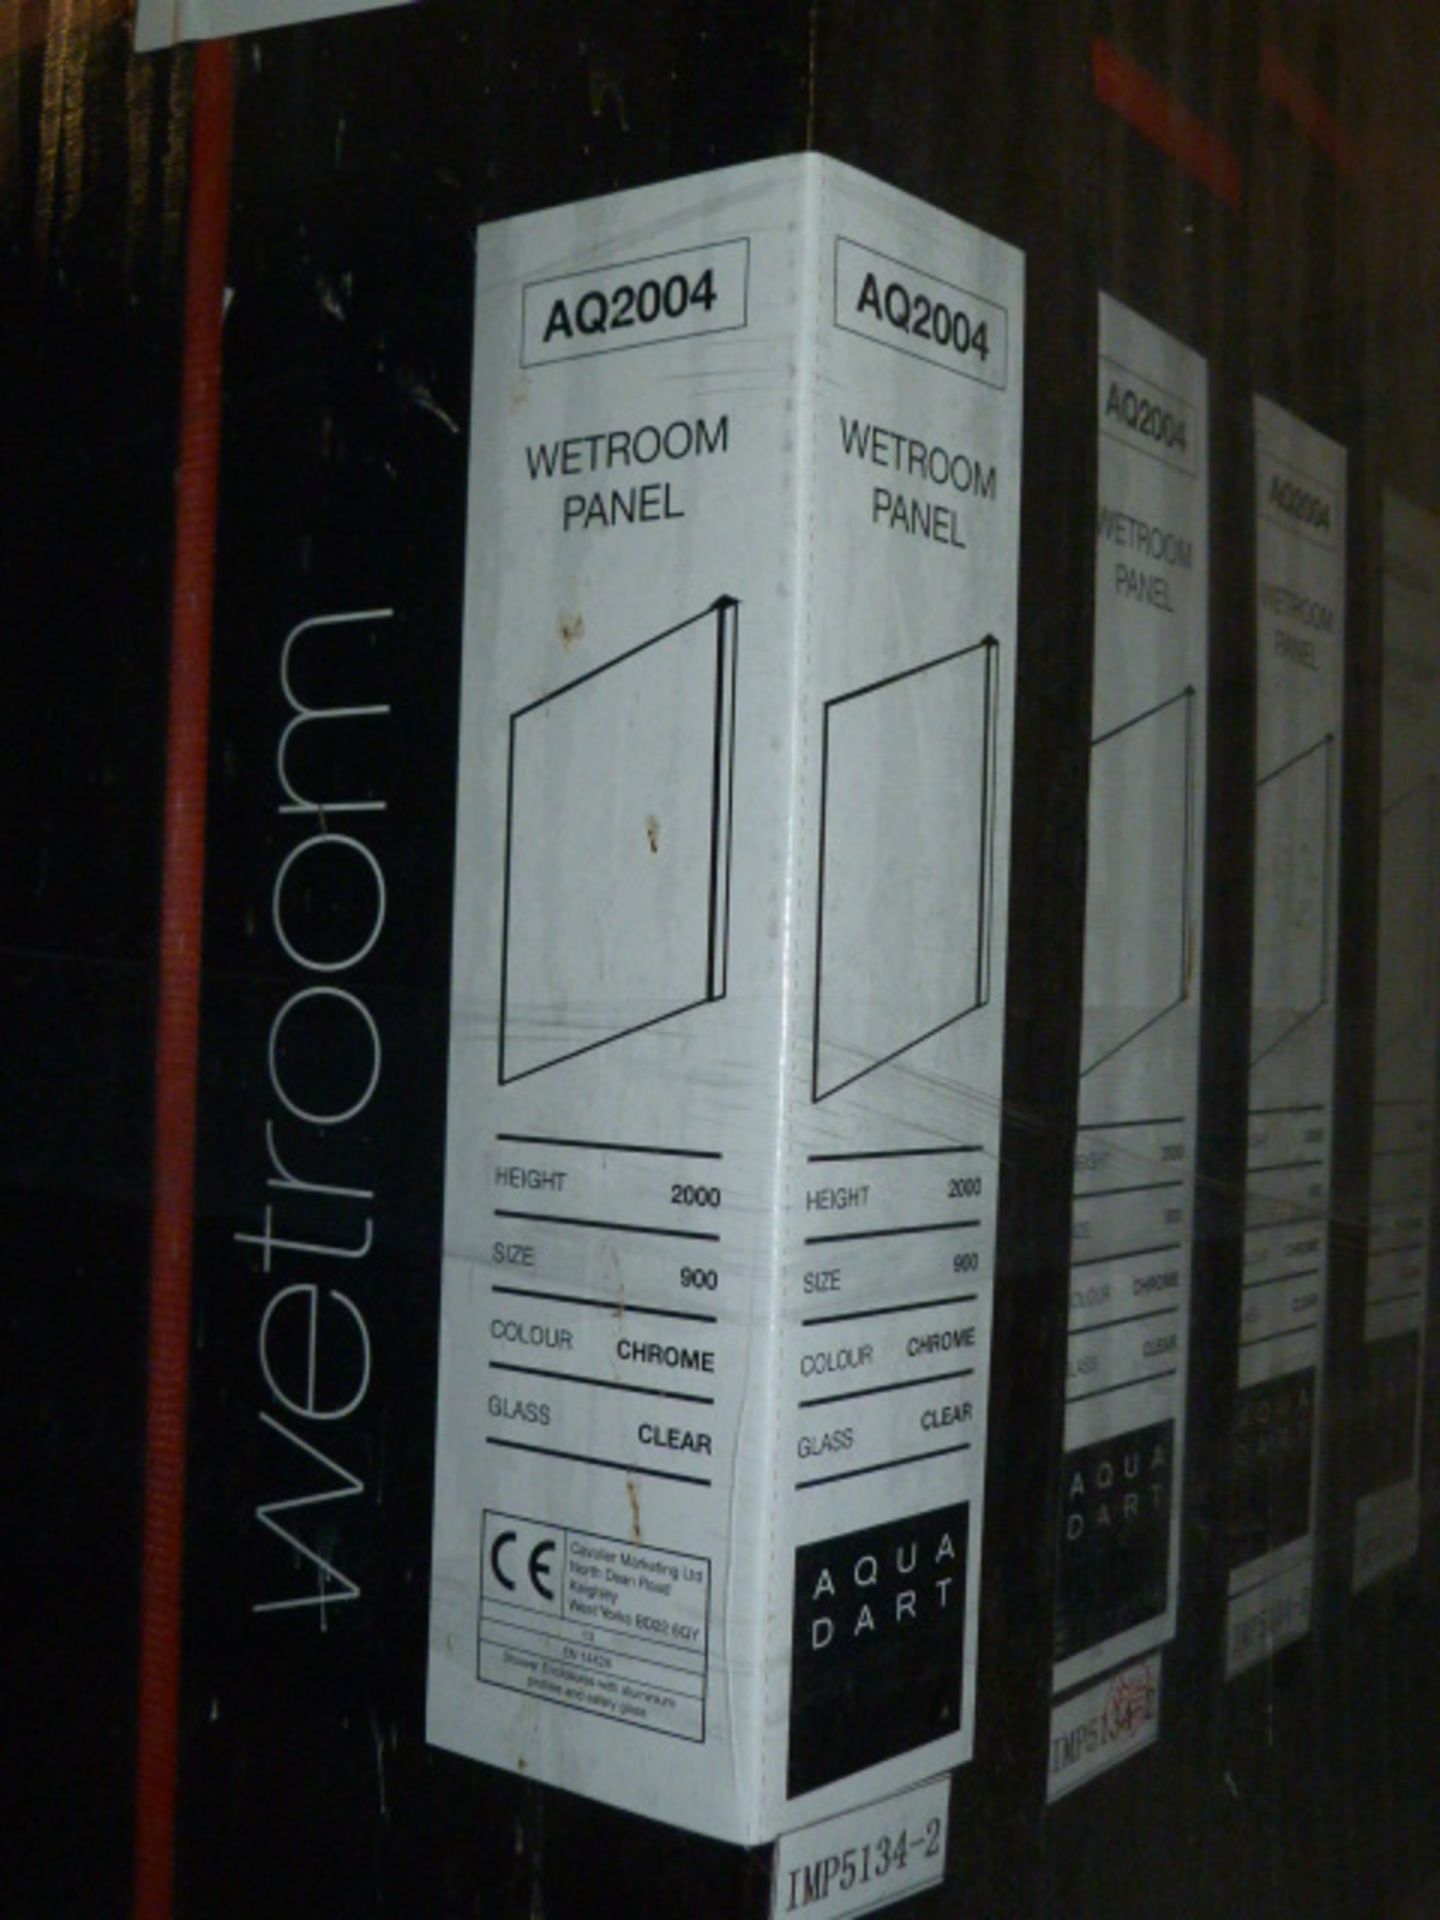 *Pallet Containing 14 Wet Room Glass Panels AQ 204